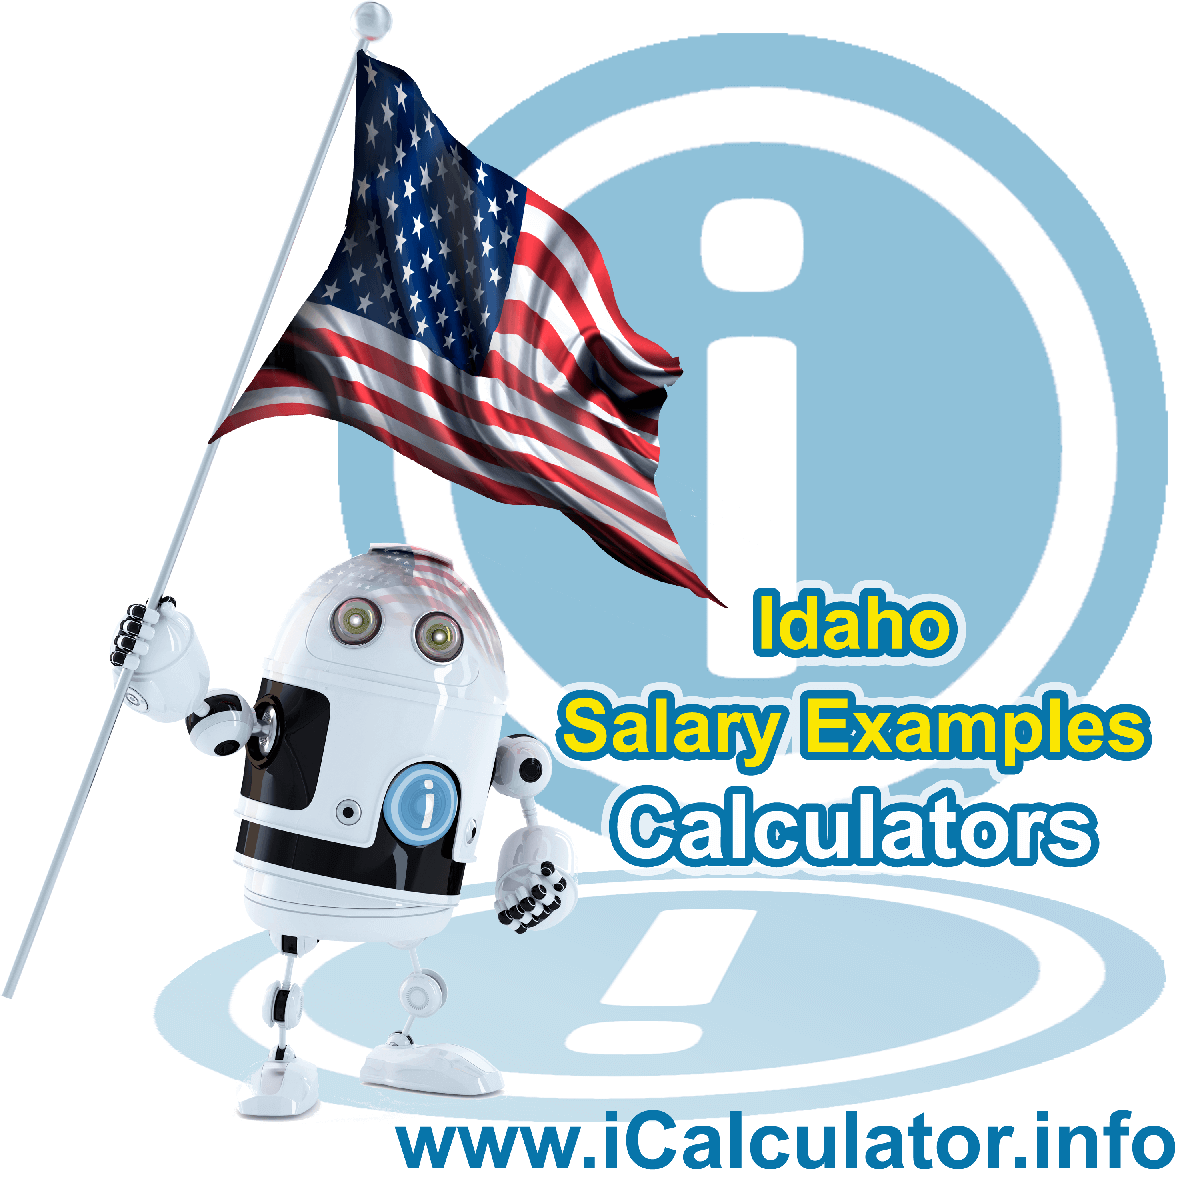 Idaho Salary Example for $100,000.00 in 2022 | iCalculator™ | $100,000.00 salary example for employee and employer paying Idaho State tincome taxes. Detailed salary after tax calculation including Idaho State Tax, Federal State Tax, Medicare Deductions, Social Security, Capital Gains and other income tax and salary deductions complete with supporting Idaho state tax tables 